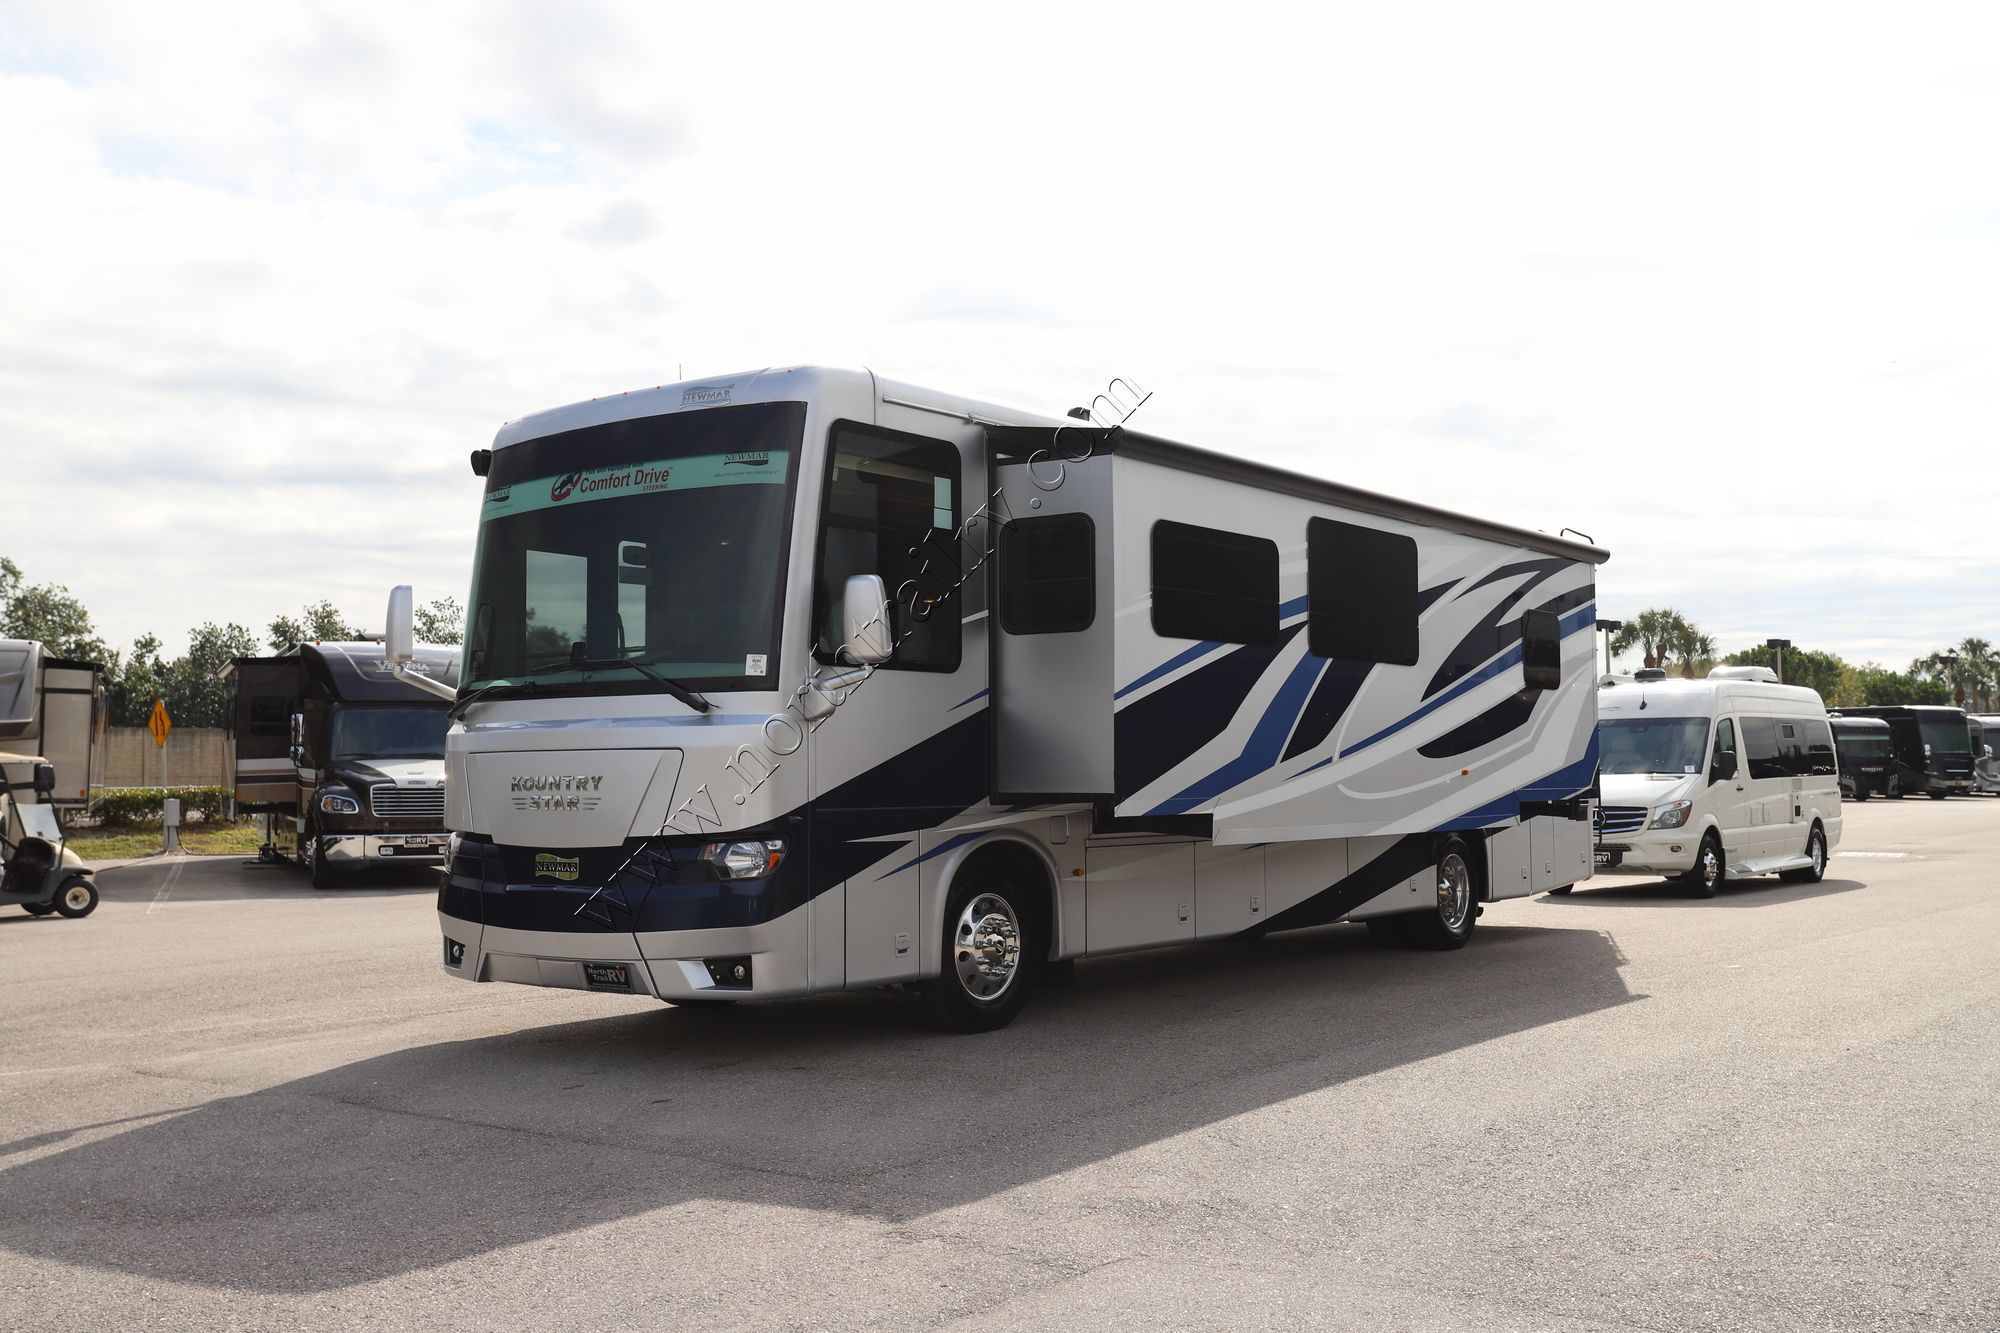 New 2023 Newmar Kountry Star 3709 Class A  For Sale